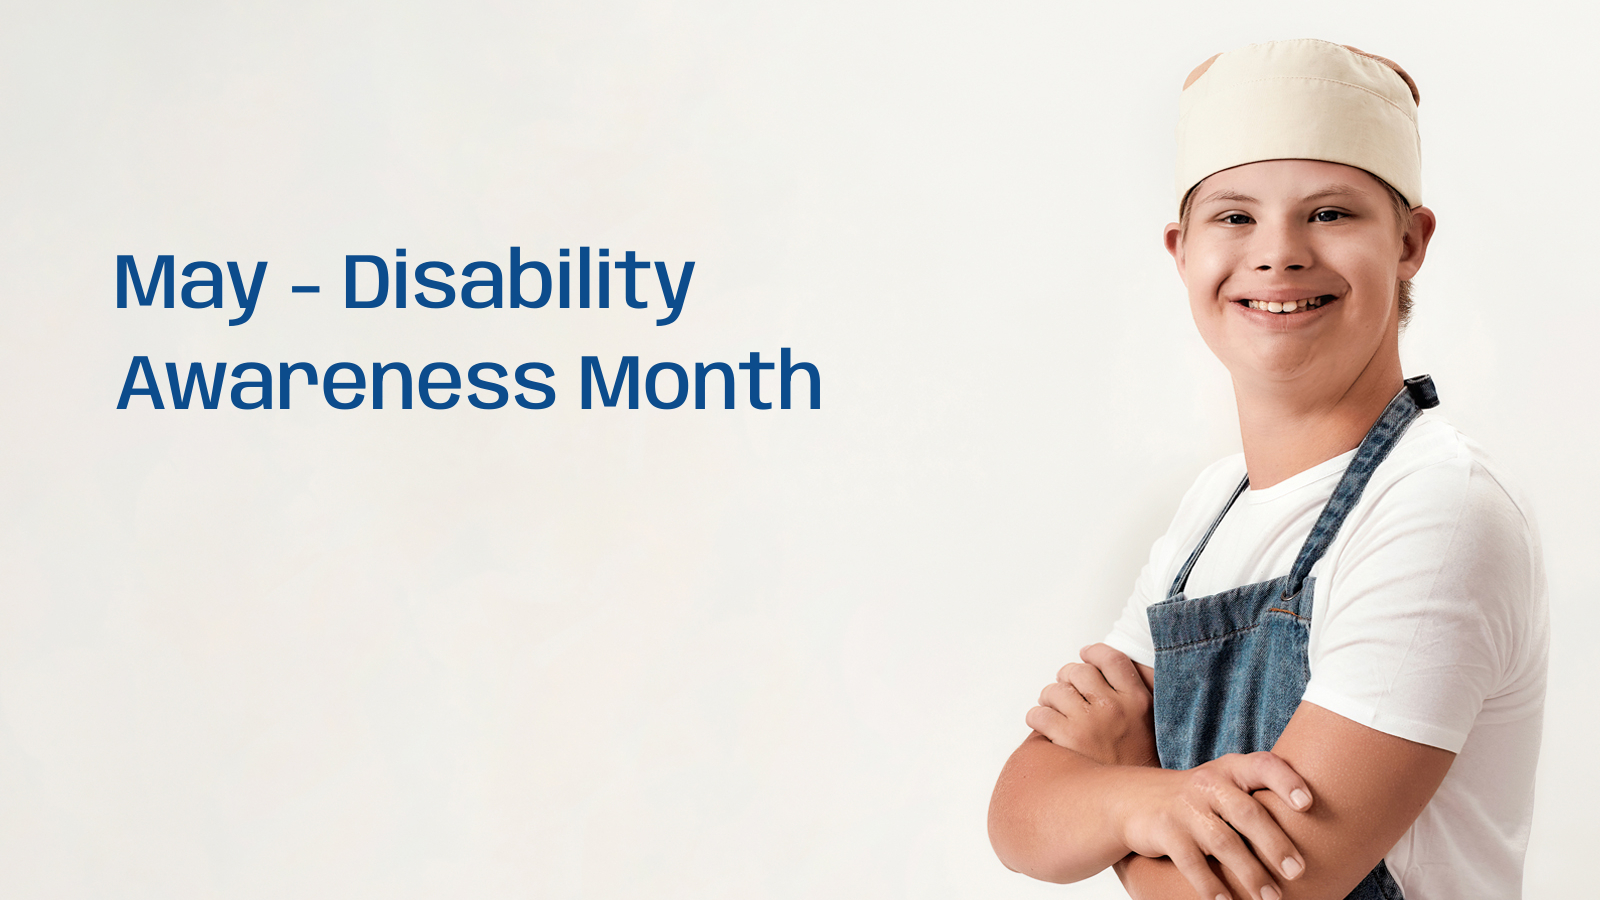 May is Disability Awareness Month - Individual with Disability Standing